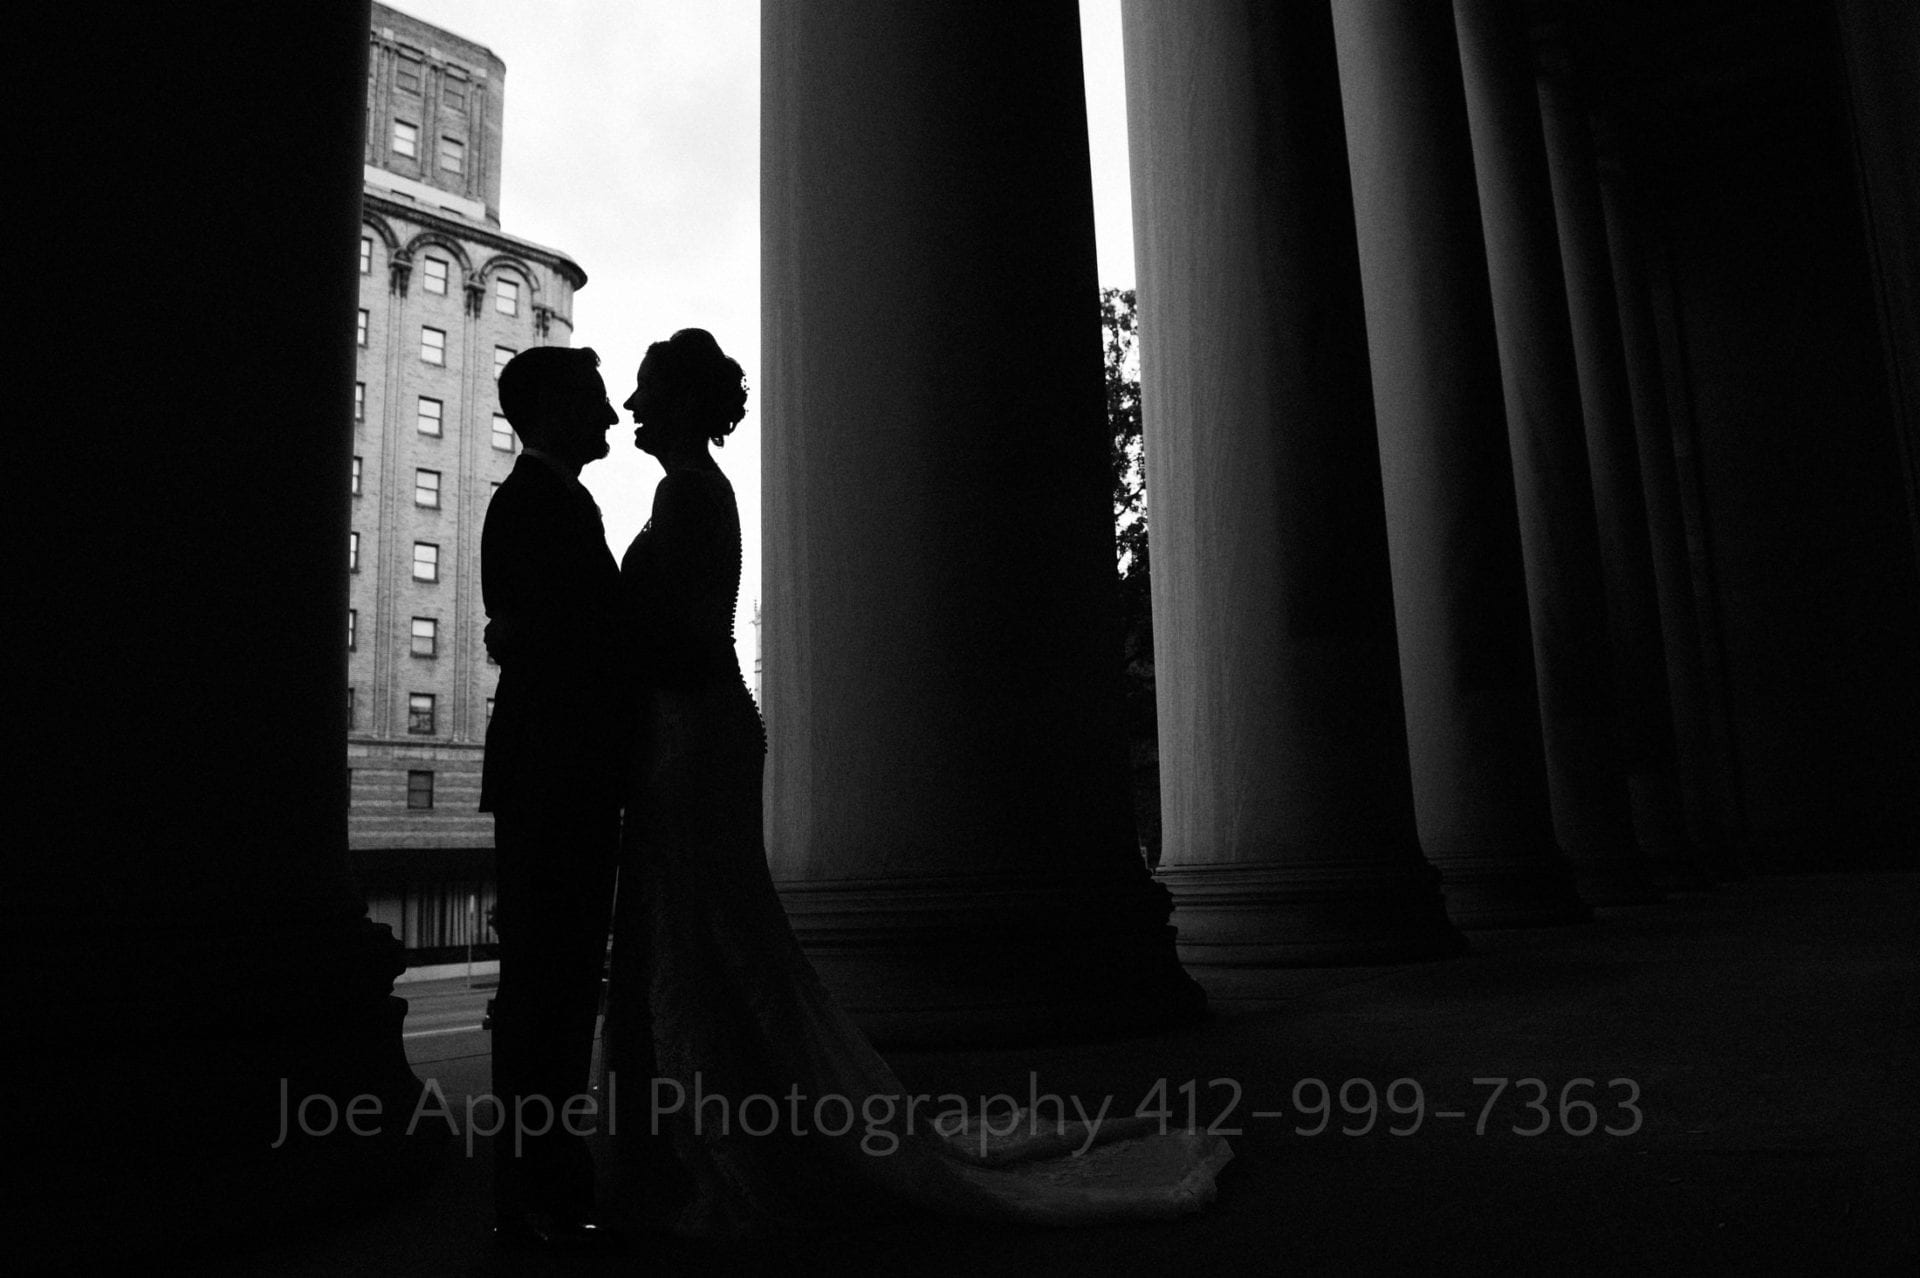 In silhouette, a bride and groom stand between stone columns facing each other.